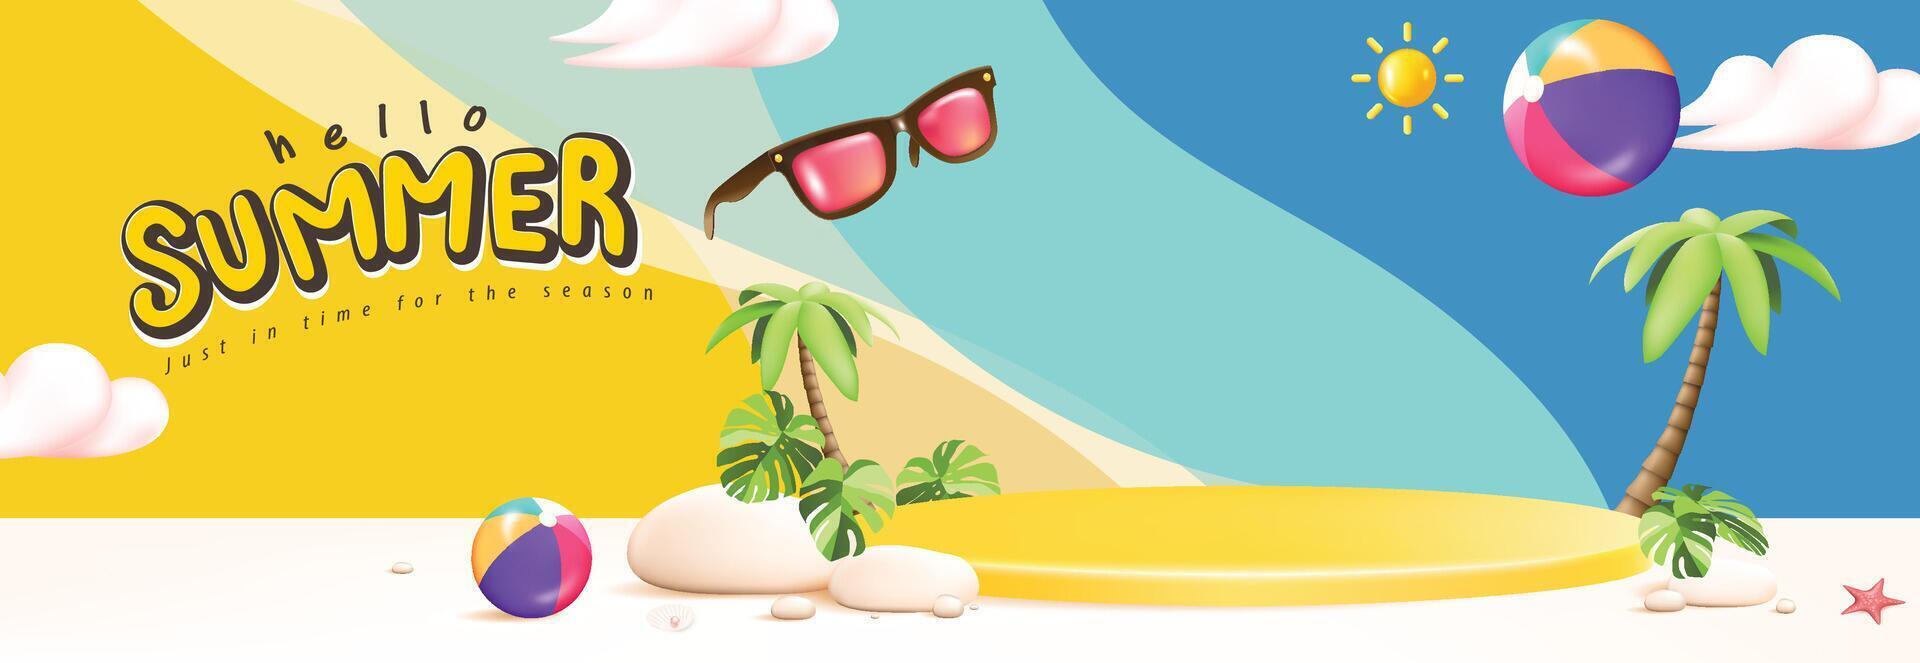 Summer sale poster banner with yellow product display podium summer tropical beach scene design background vector